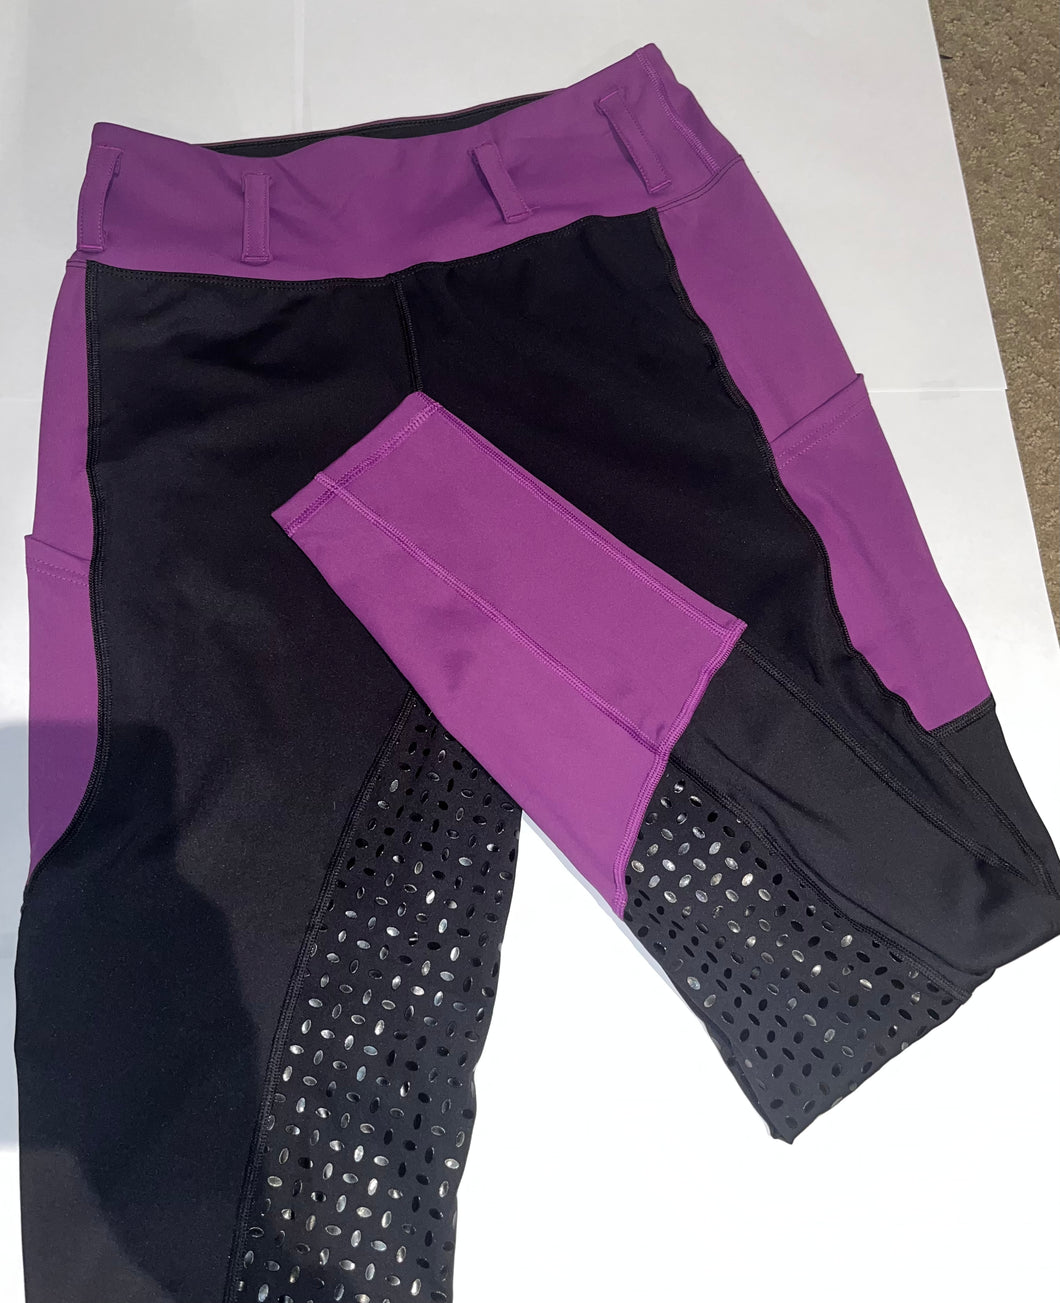 Adults Purple and black tights